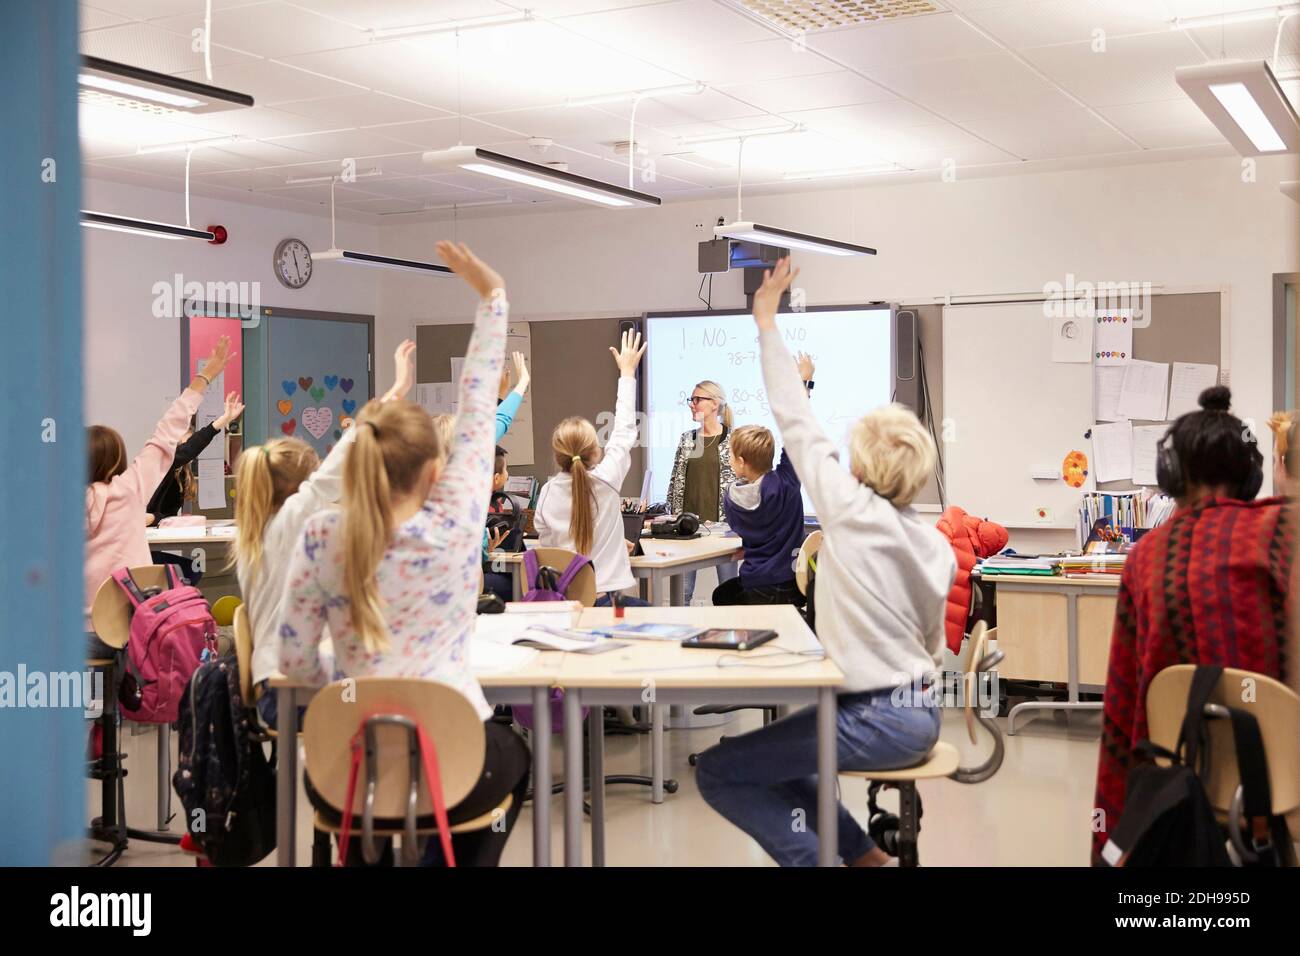 Teacher looking at students with arms raised in classroom Stock Photo